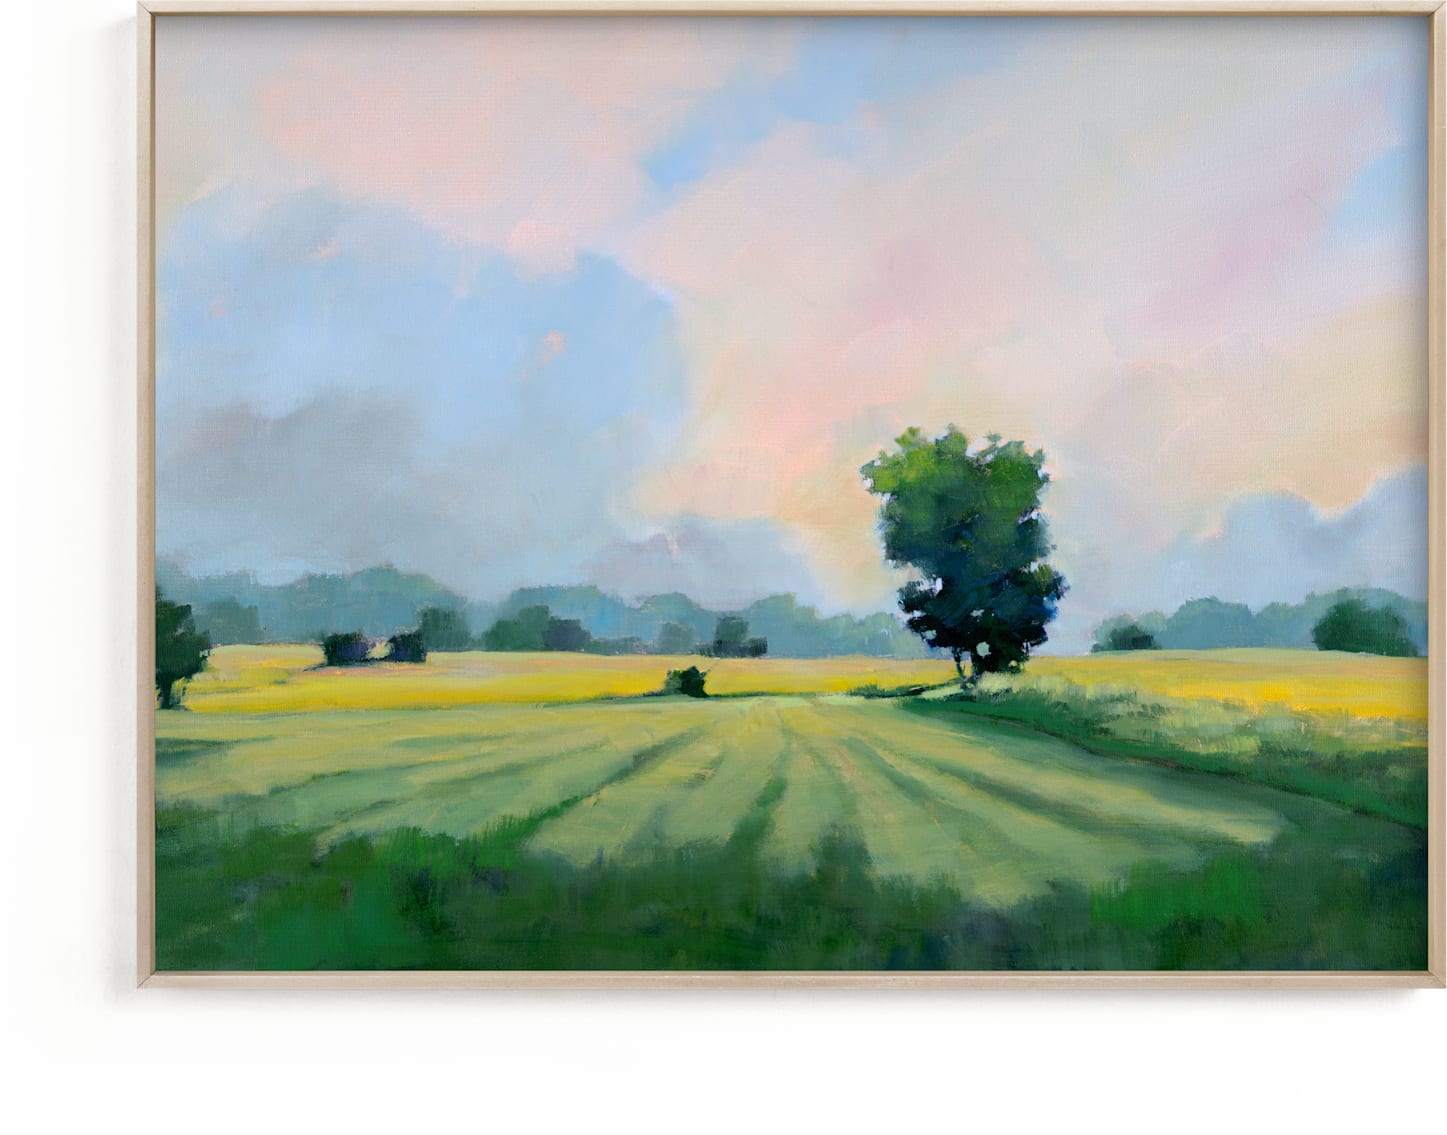 This is a blue, pink, green art by Stephanie Goos Johnson called Far Fields.